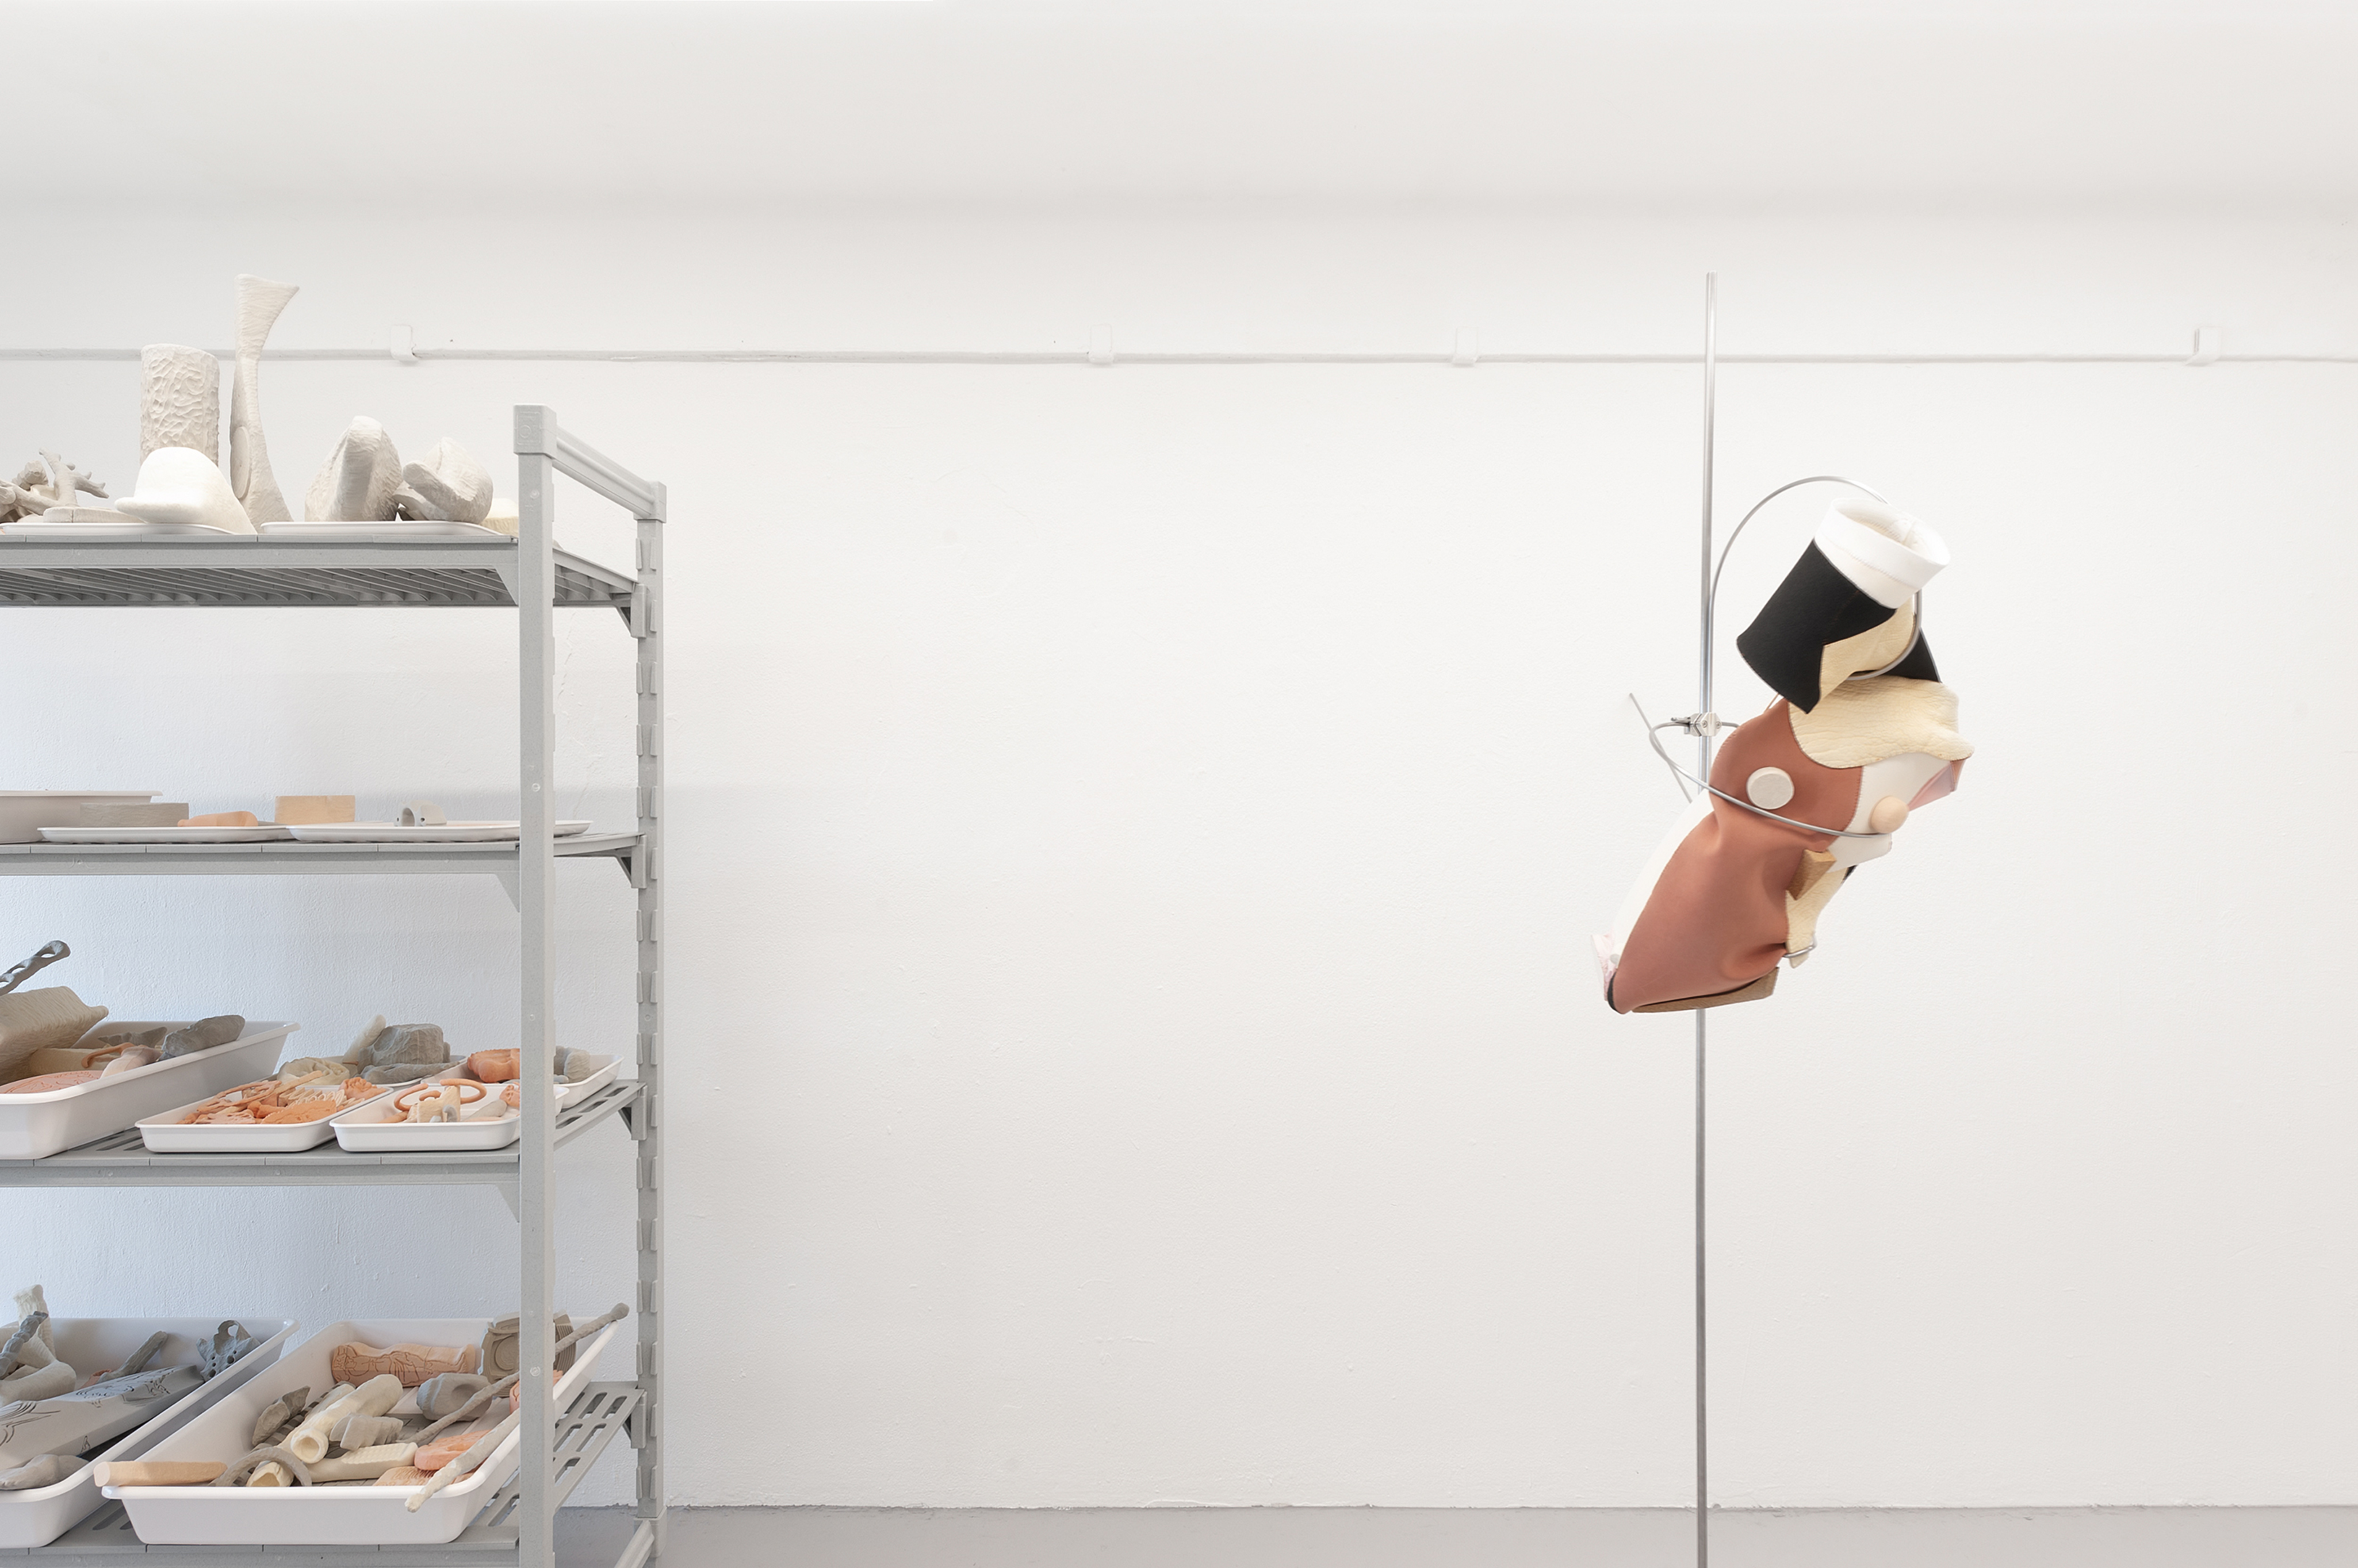 Photo of an art installation called Hands (and Other Products of Labor) by Klára Čermáková (Diploma Projects 2020, UMPRUM — Academy of Arts, Architecture & Design in Prague, Czechia) [Side view]. On the left side, you can see a large laboratory shelf on which many smaller objects depict parts of the human body, bones, objects of daily use, or their free fusion. On the right side is a sculpture of the torso (fragment of the human body) on a metal base.